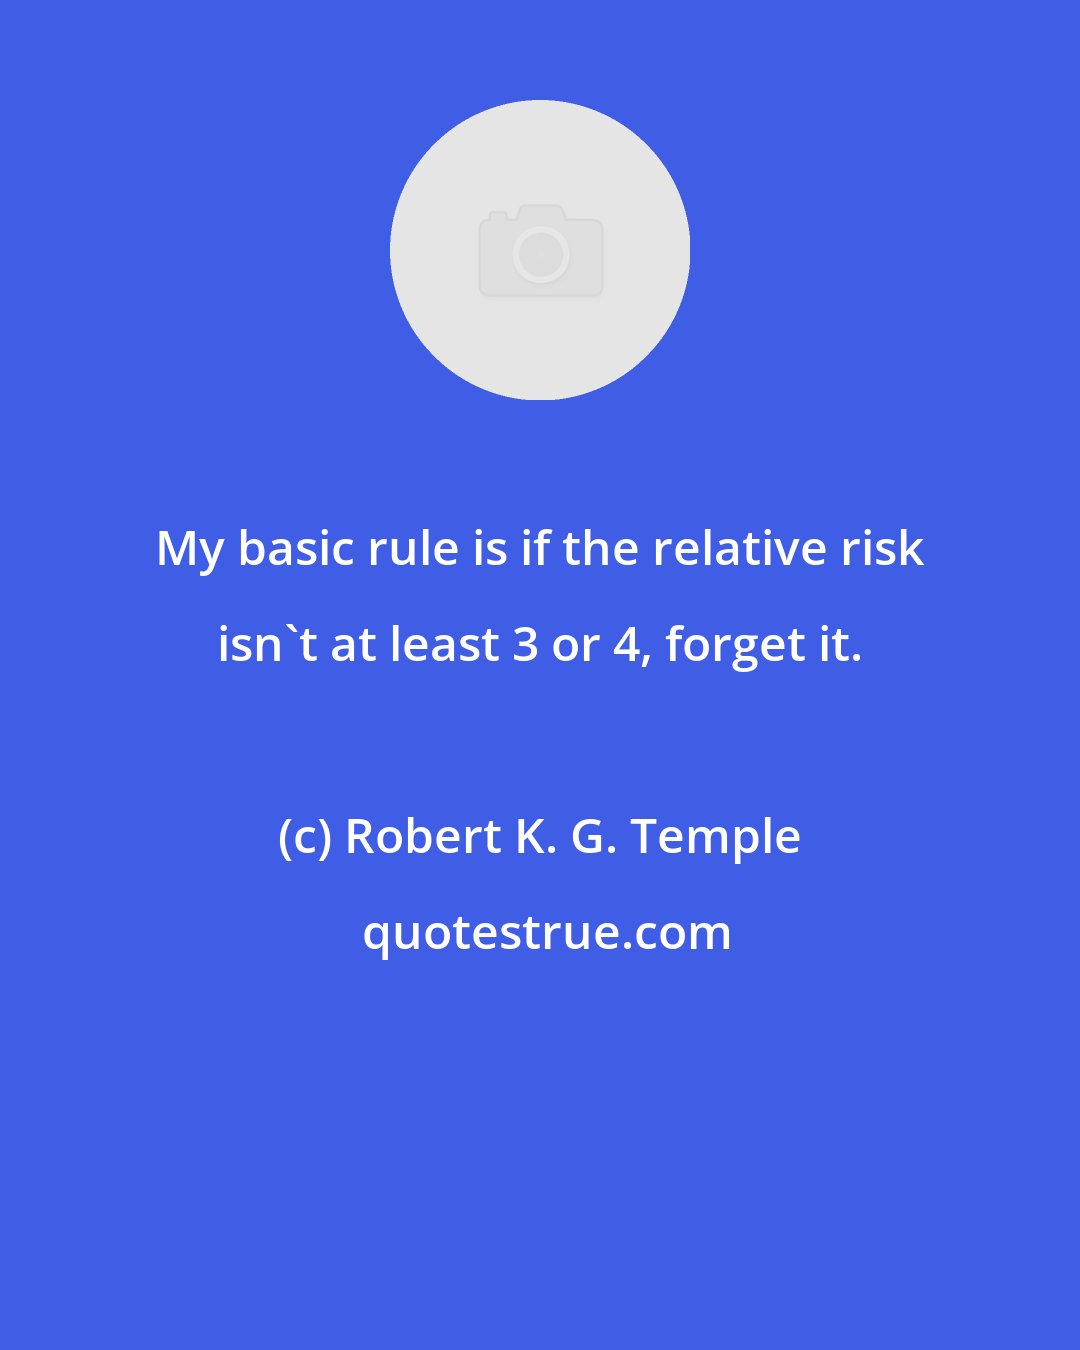 Robert K. G. Temple: My basic rule is if the relative risk isn't at least 3 or 4, forget it.